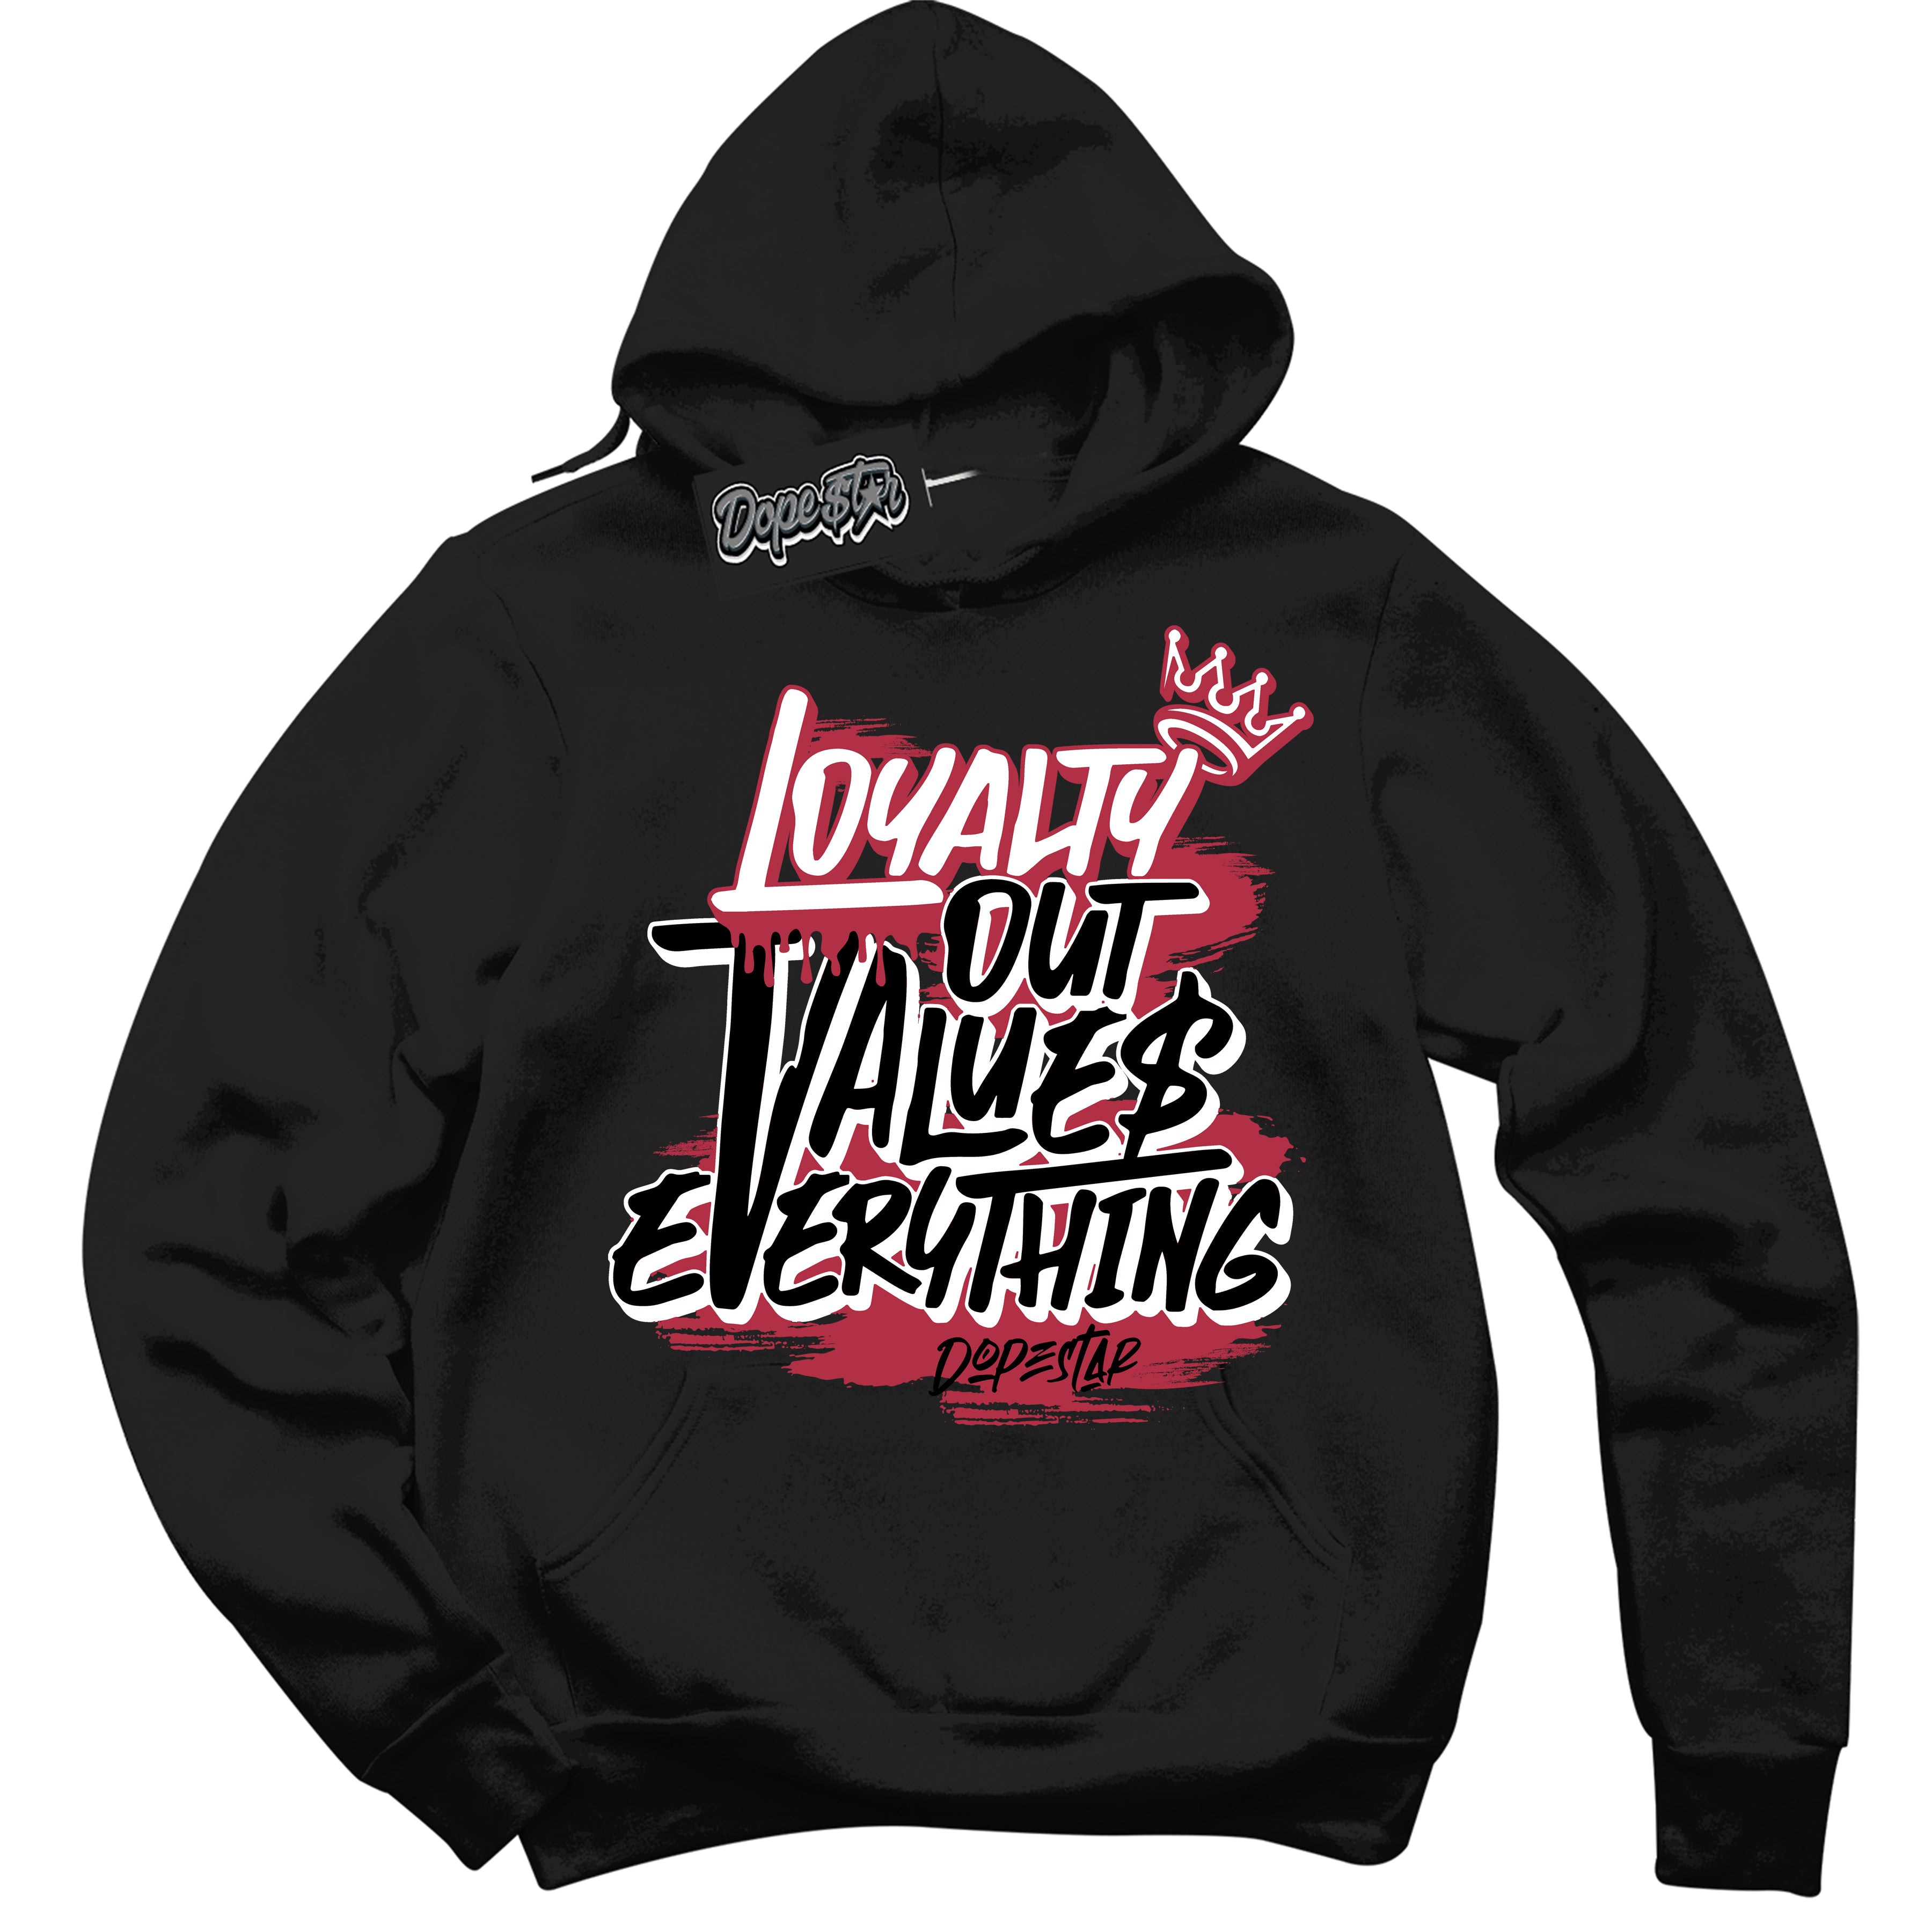 Cool Black Hoodie with “ Loyalty Out Values Everything ”  design that Perfectly Matches  FlyEase Black White Fire Red 1s Sneakers.